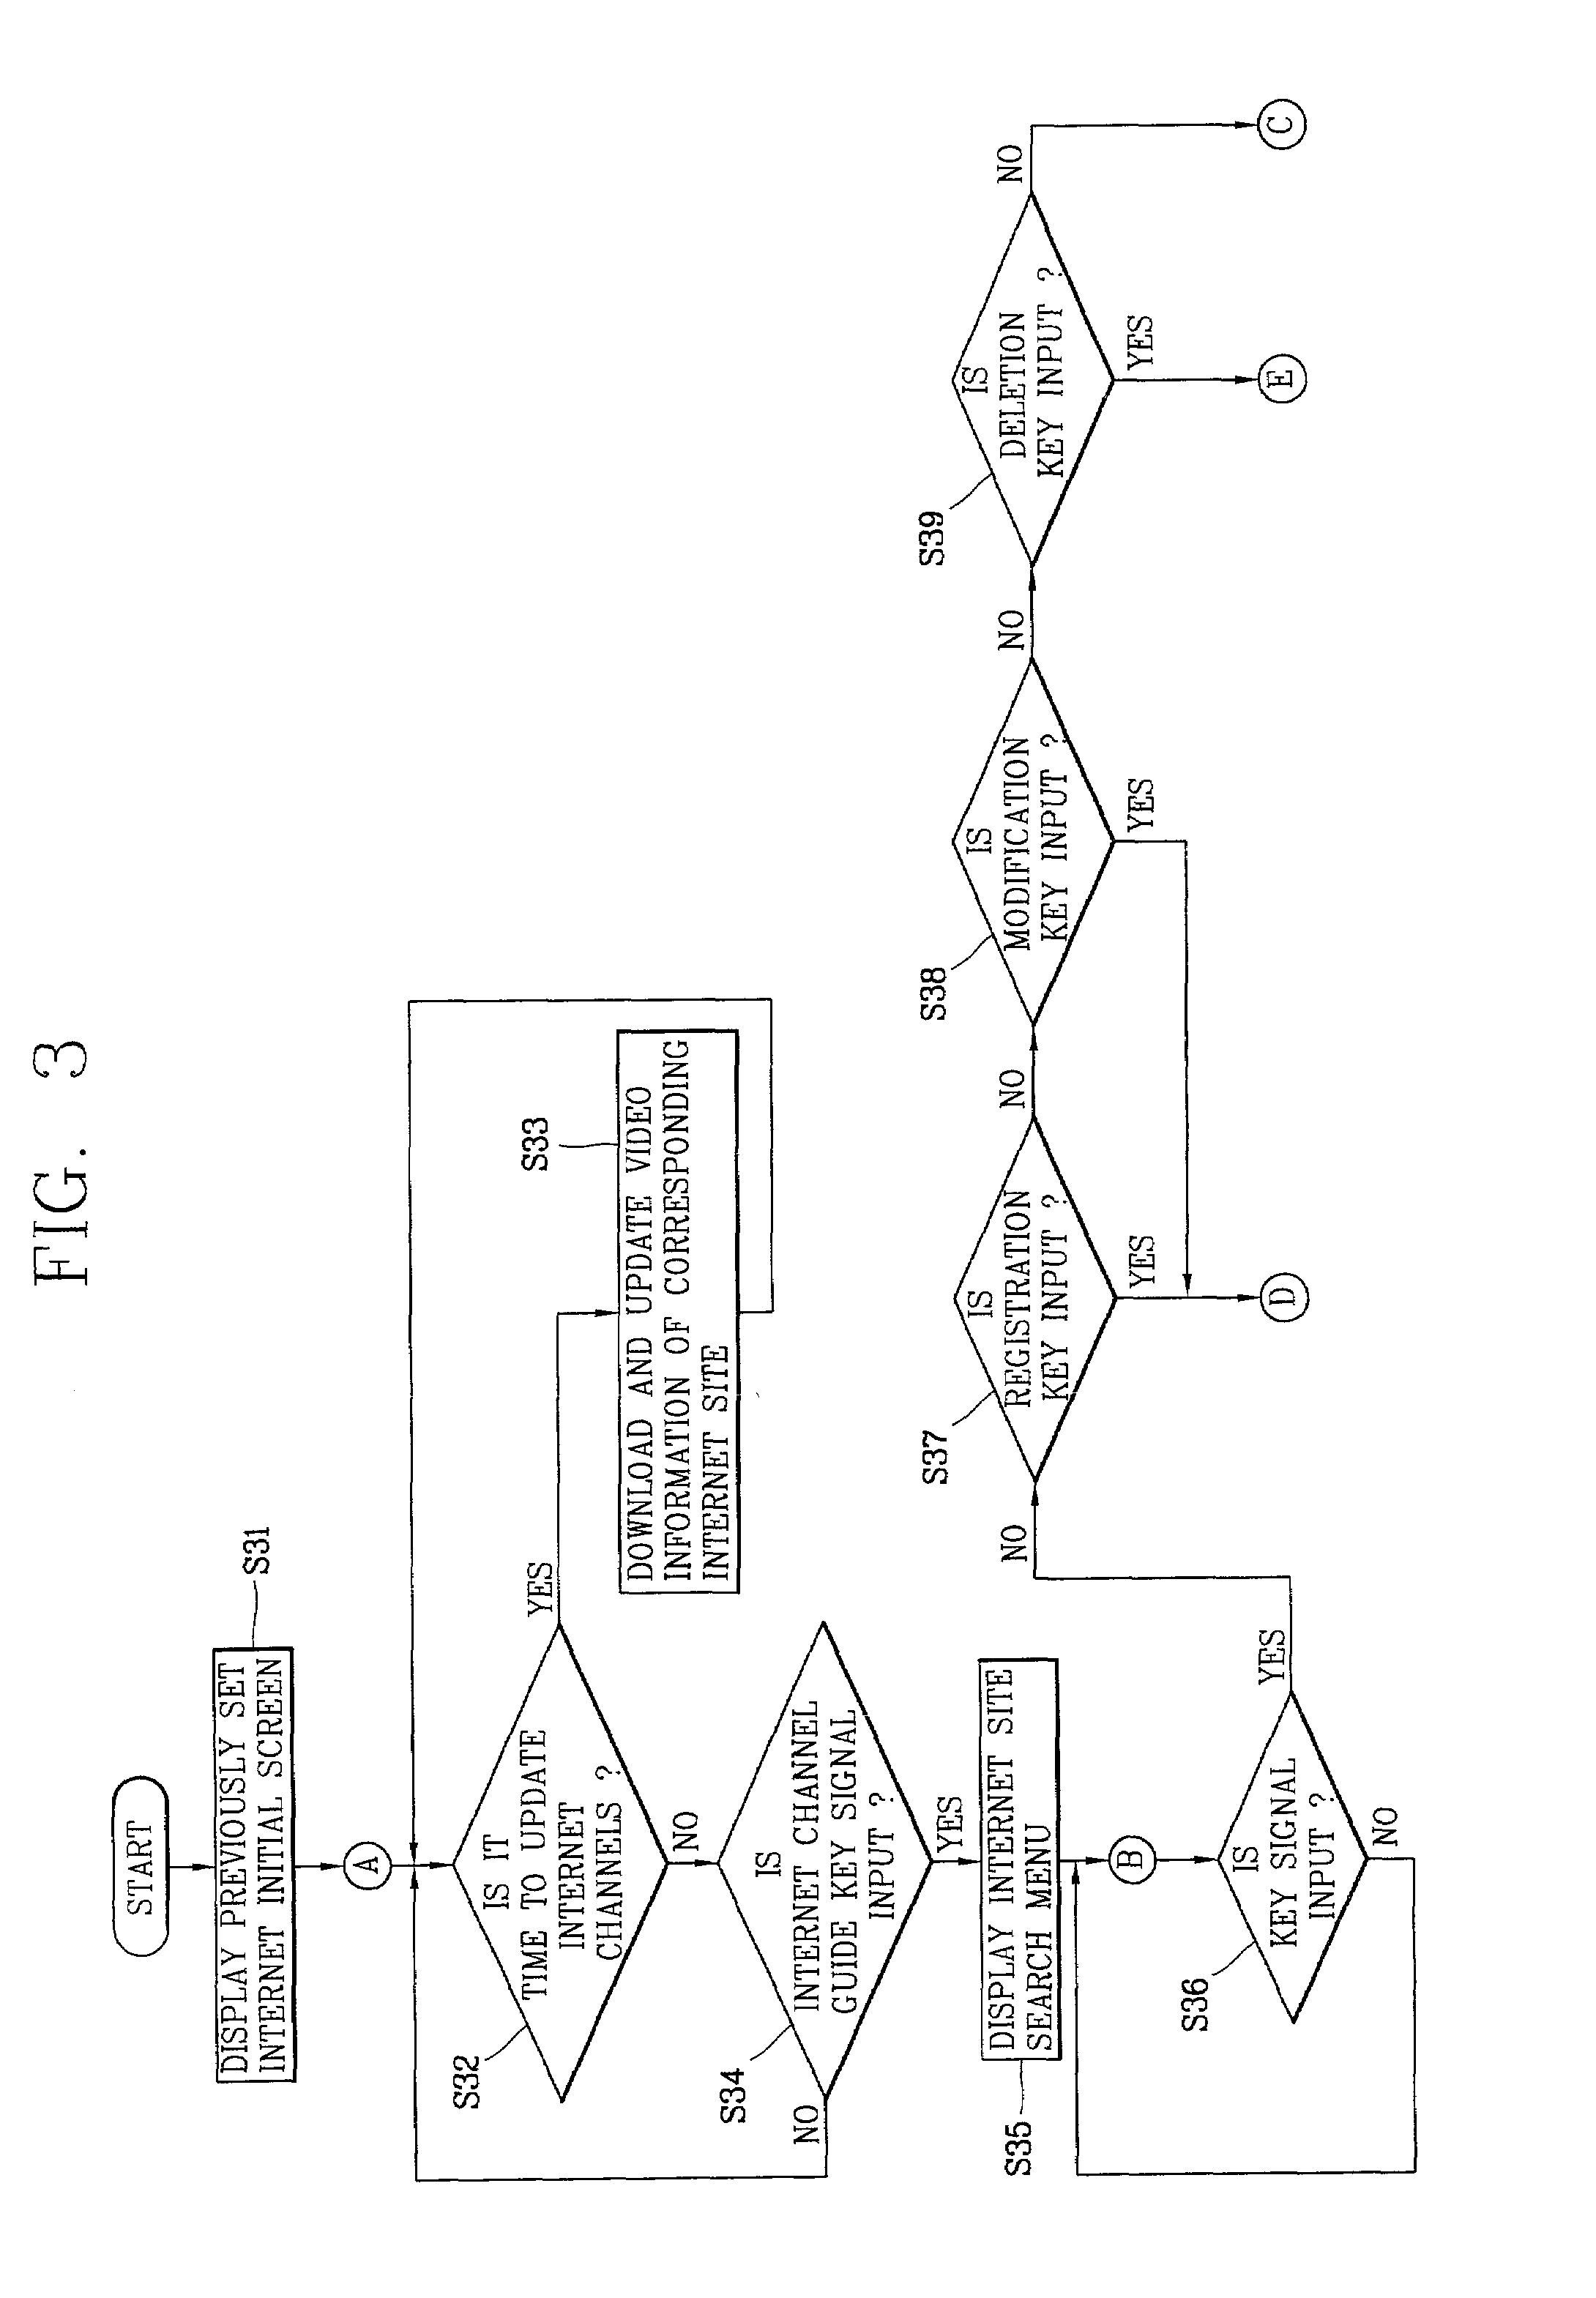 Apparatus for displaying internet site search menu of video apparatus having internet function and method therefor